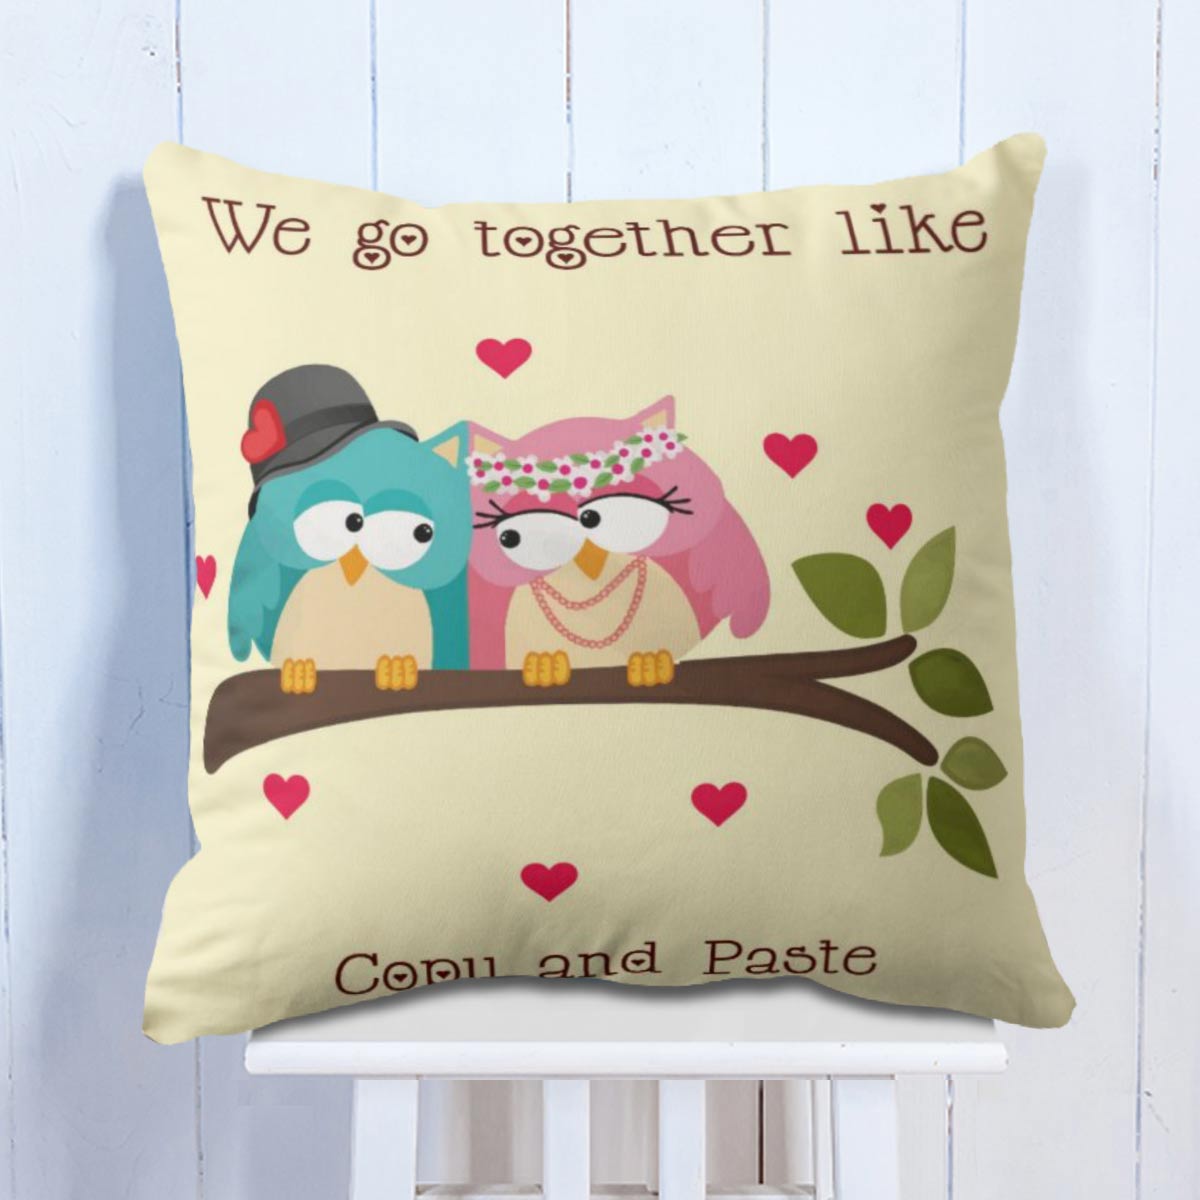 We go together like copy and paste Cushion